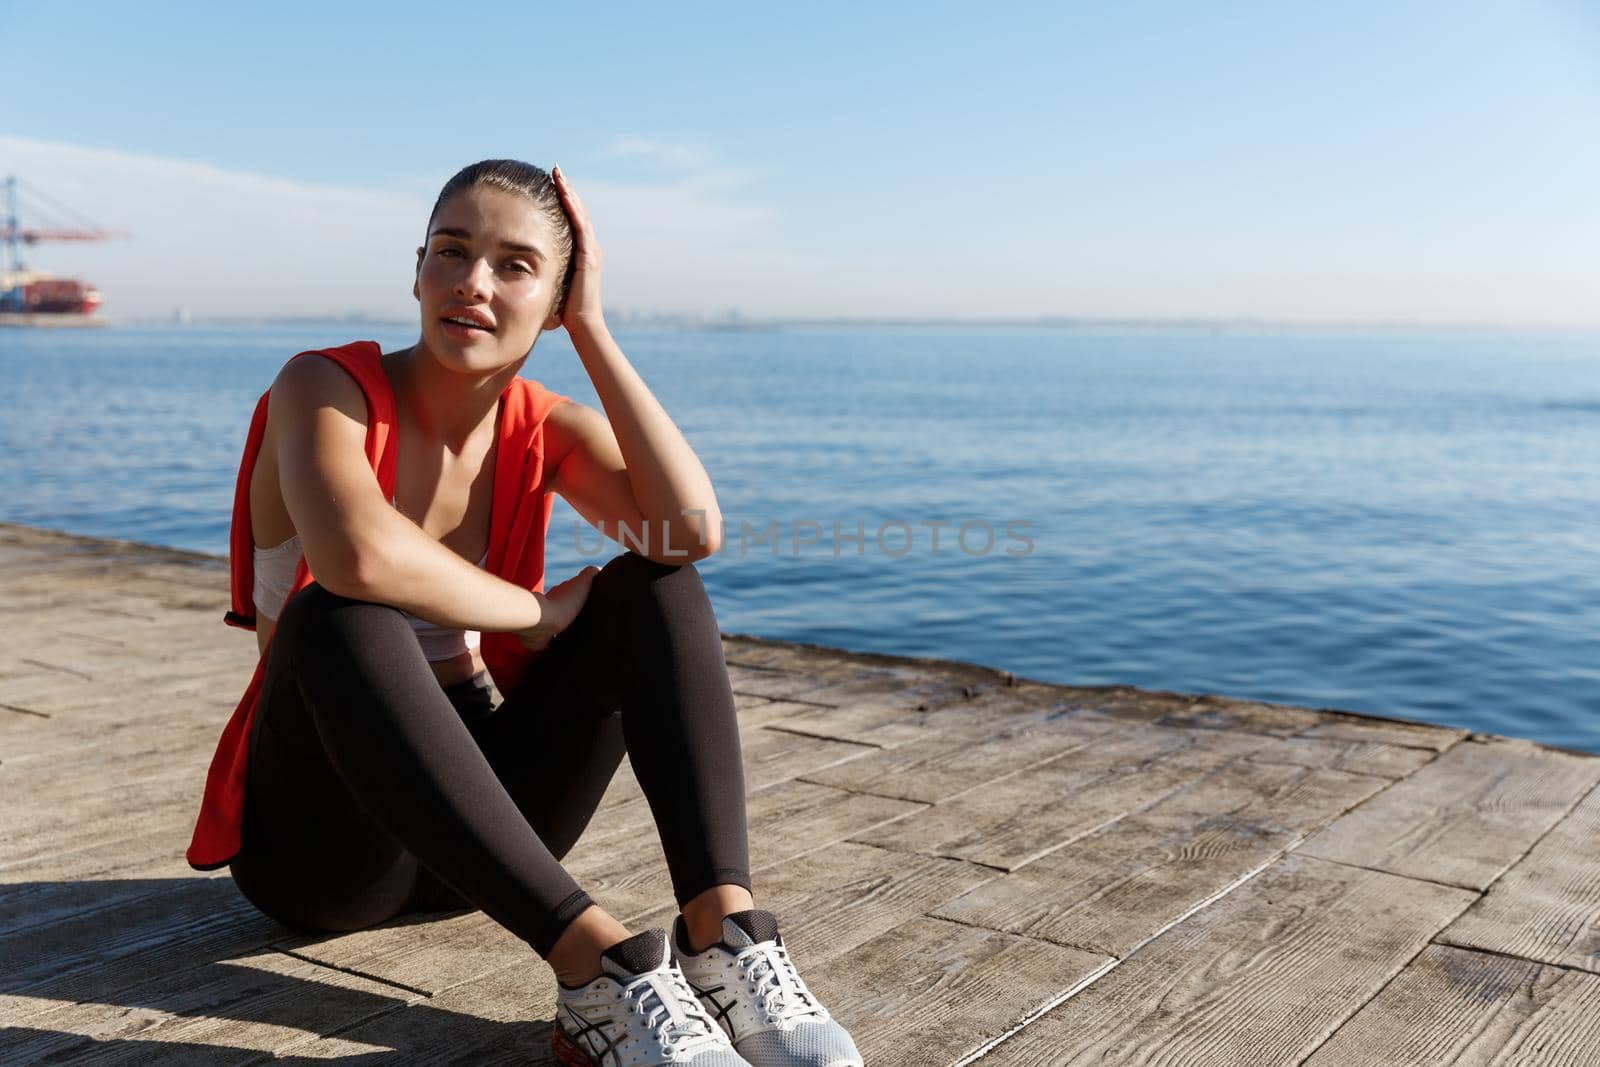 Outdoor shot of attractive fitness woman having a break after workout or jogging, sitting near sea and contemplating the view.